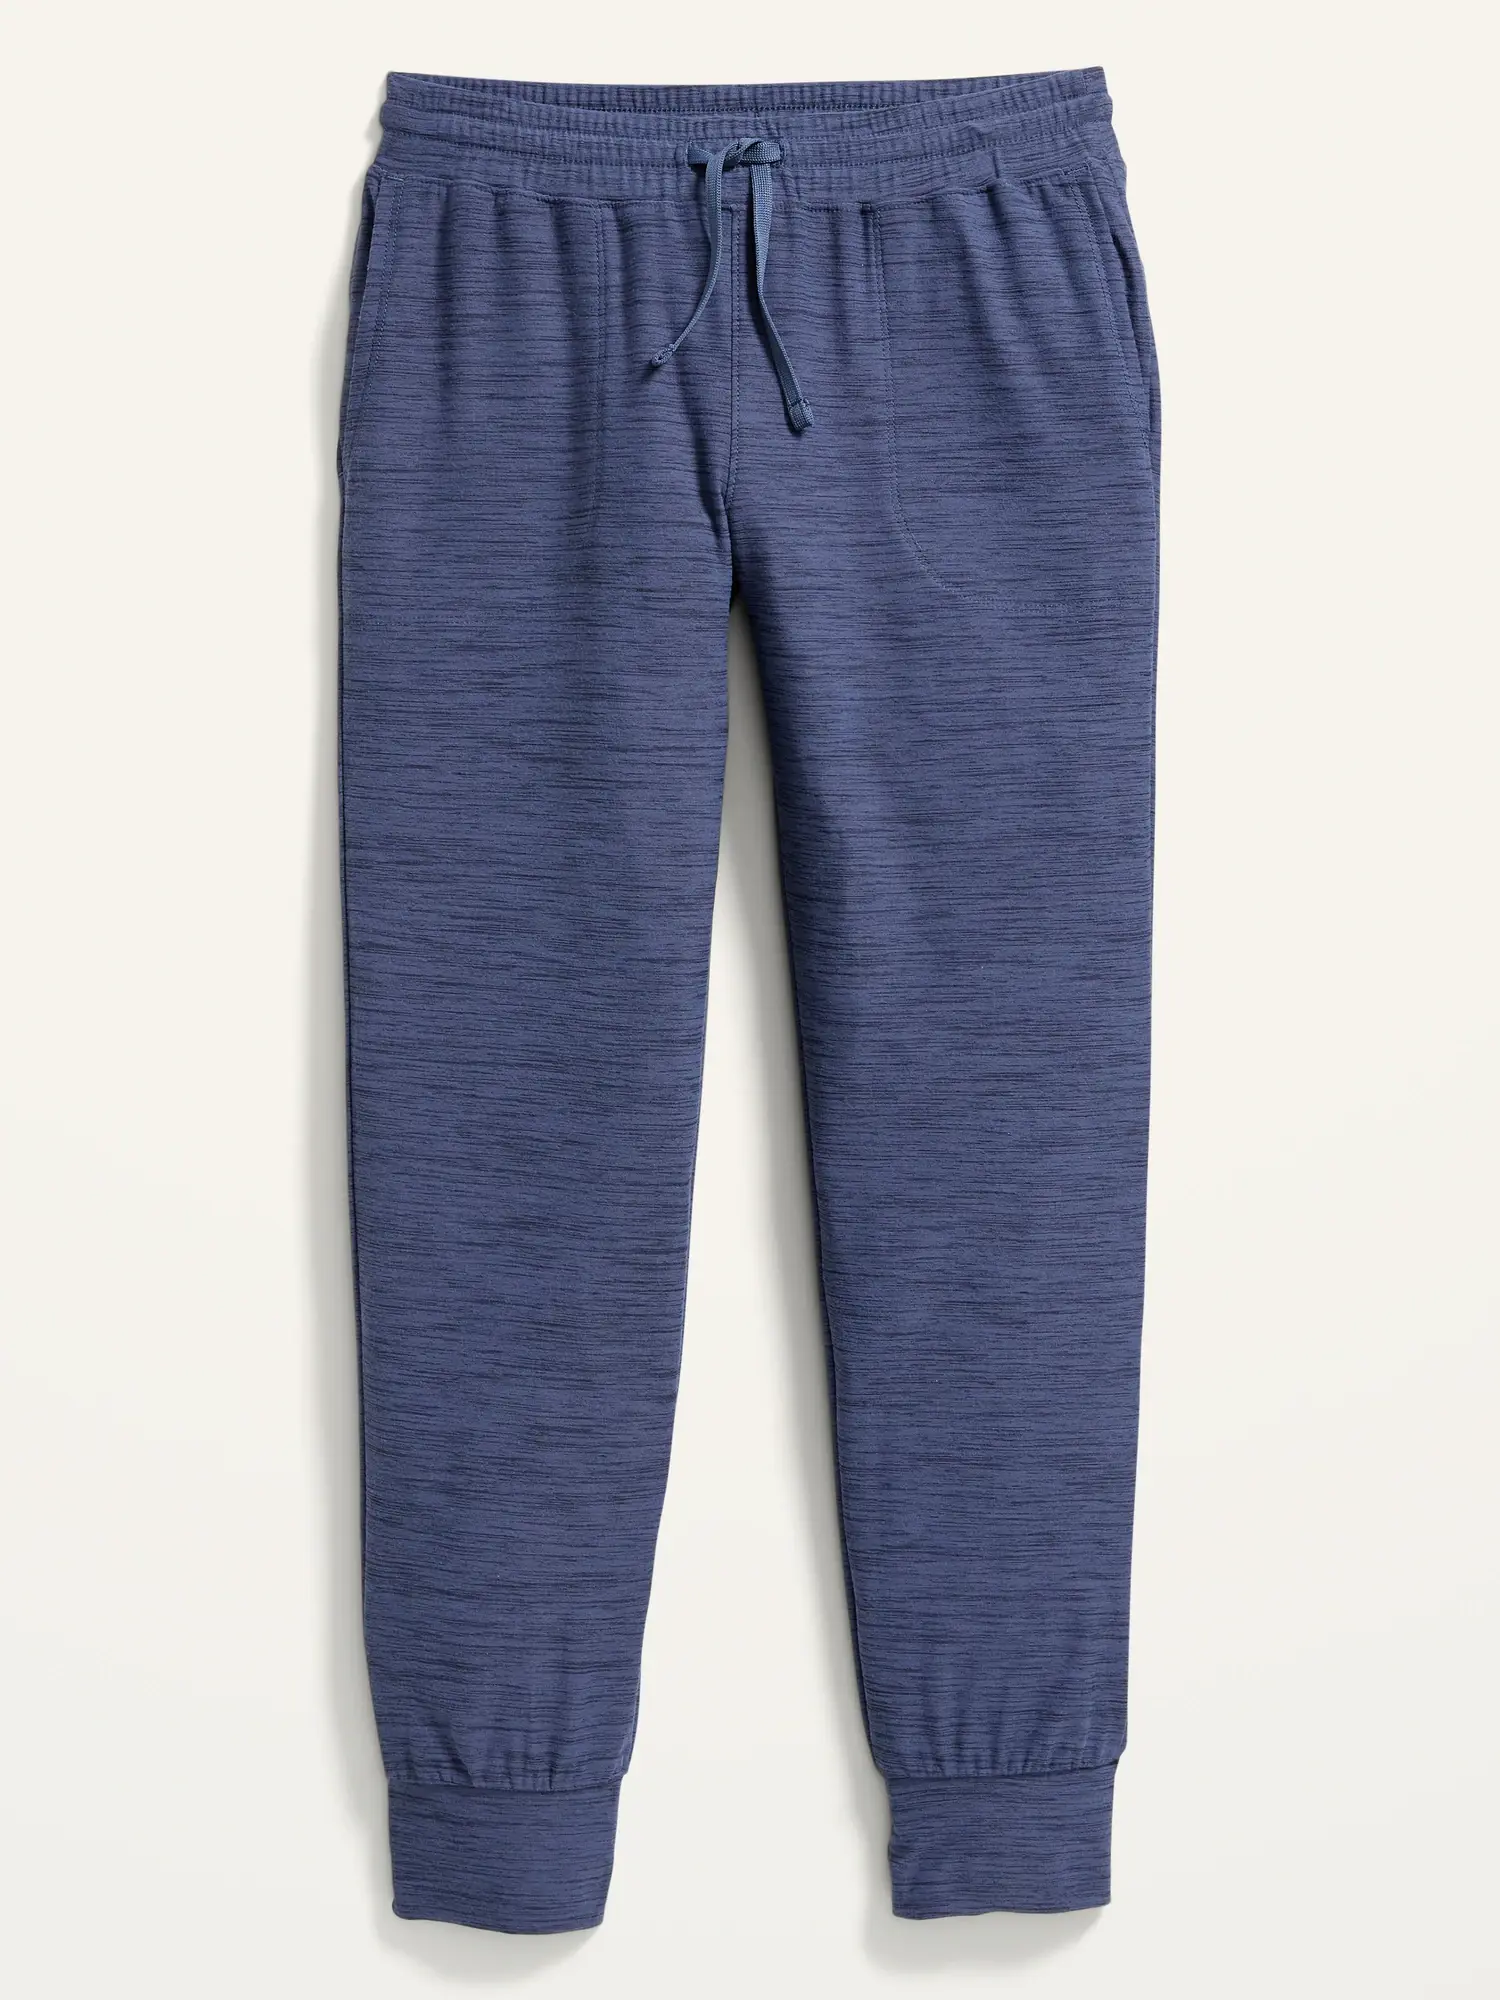 Breathe ON Joggers for Girls